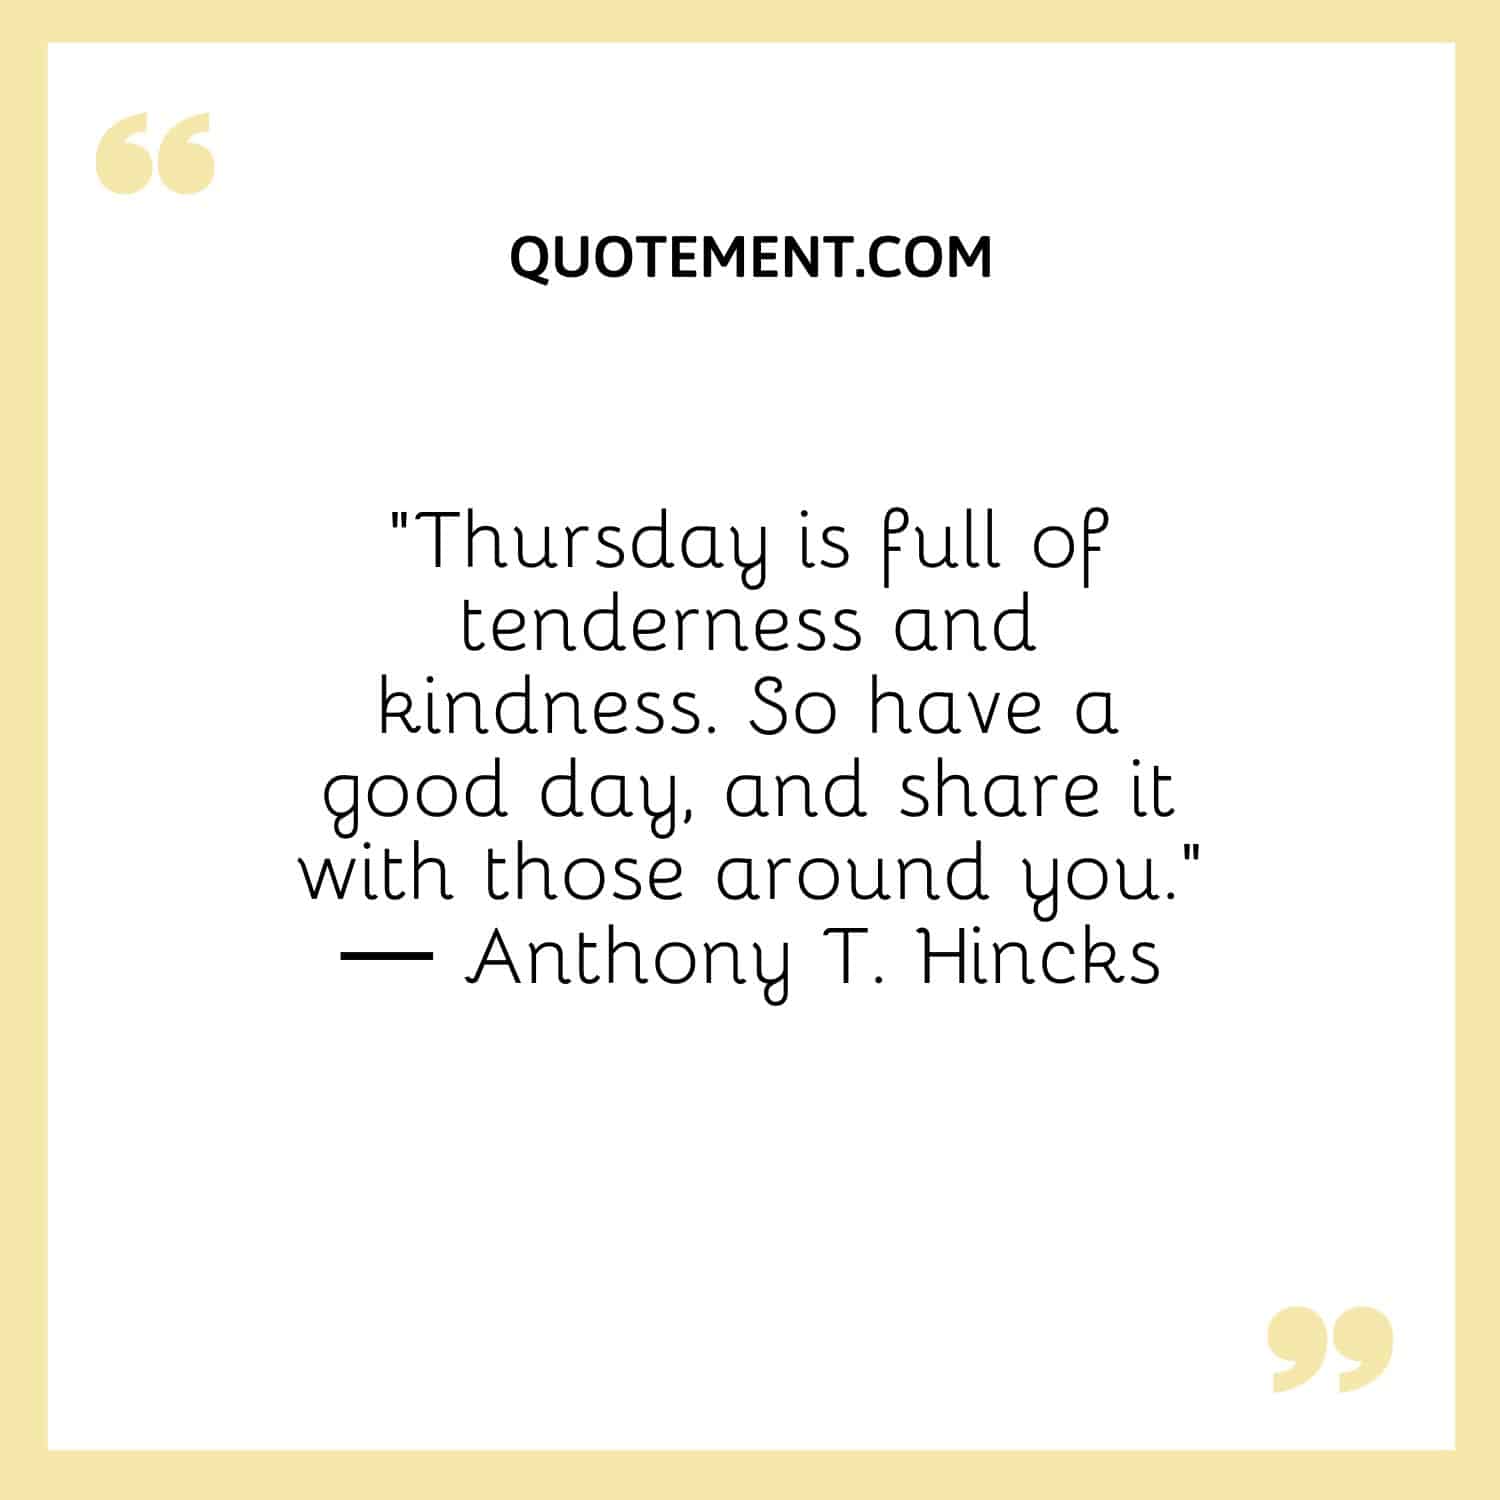 “Thursday is full of tenderness and kindness. So have a good day, and share it with those around you.” ― Anthony T. Hincks